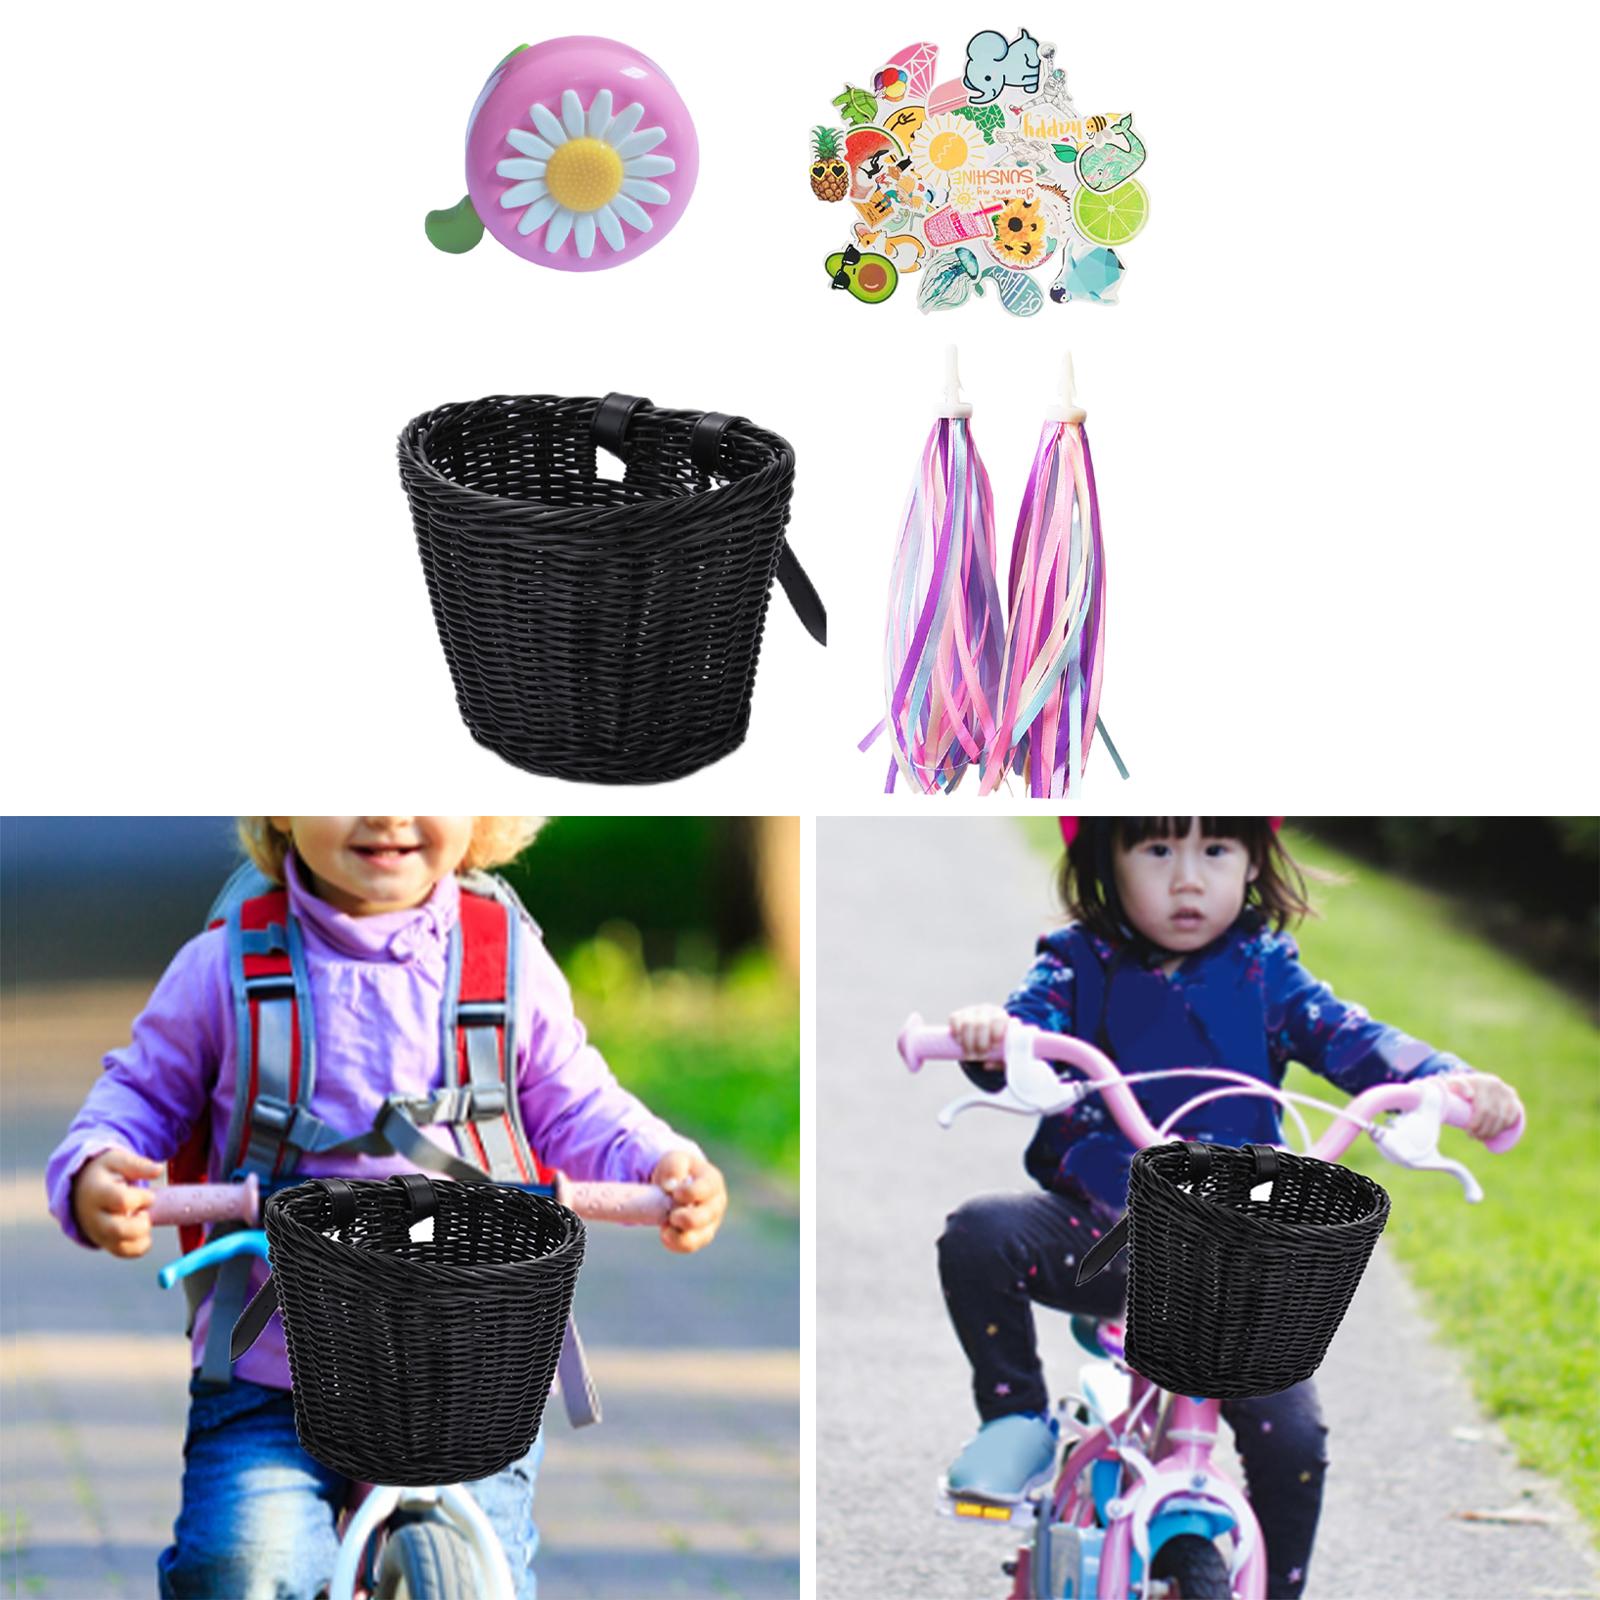 Bike Basket with Colored Tassel Cycling Accs Handmade Wicker for Adult Black